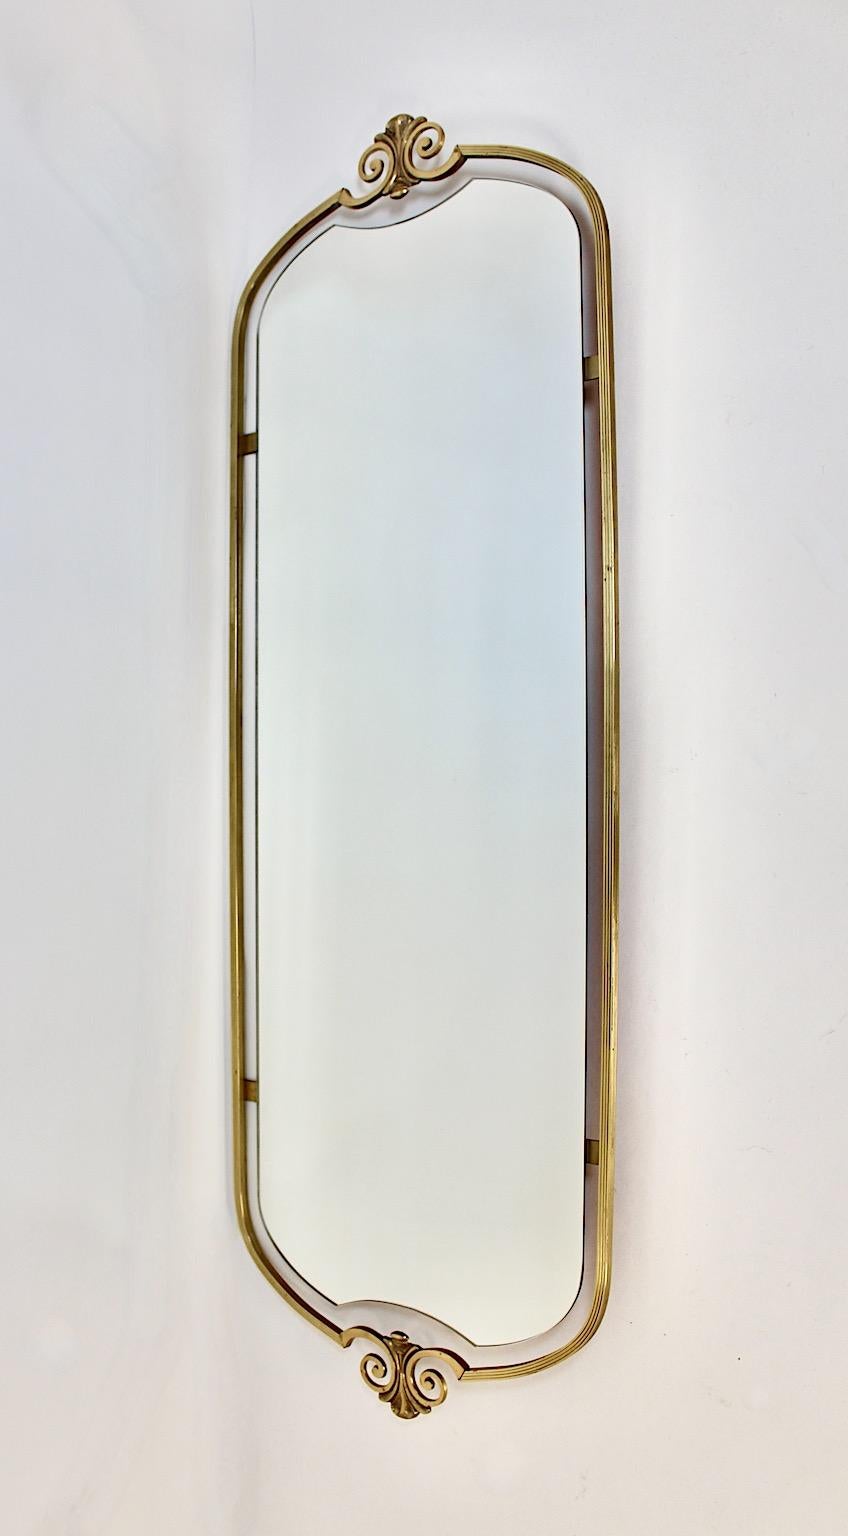 Modern Hollywood Regency Style Brass Full Length Mirror Wall Mirror, 1970s Italy For Sale 1